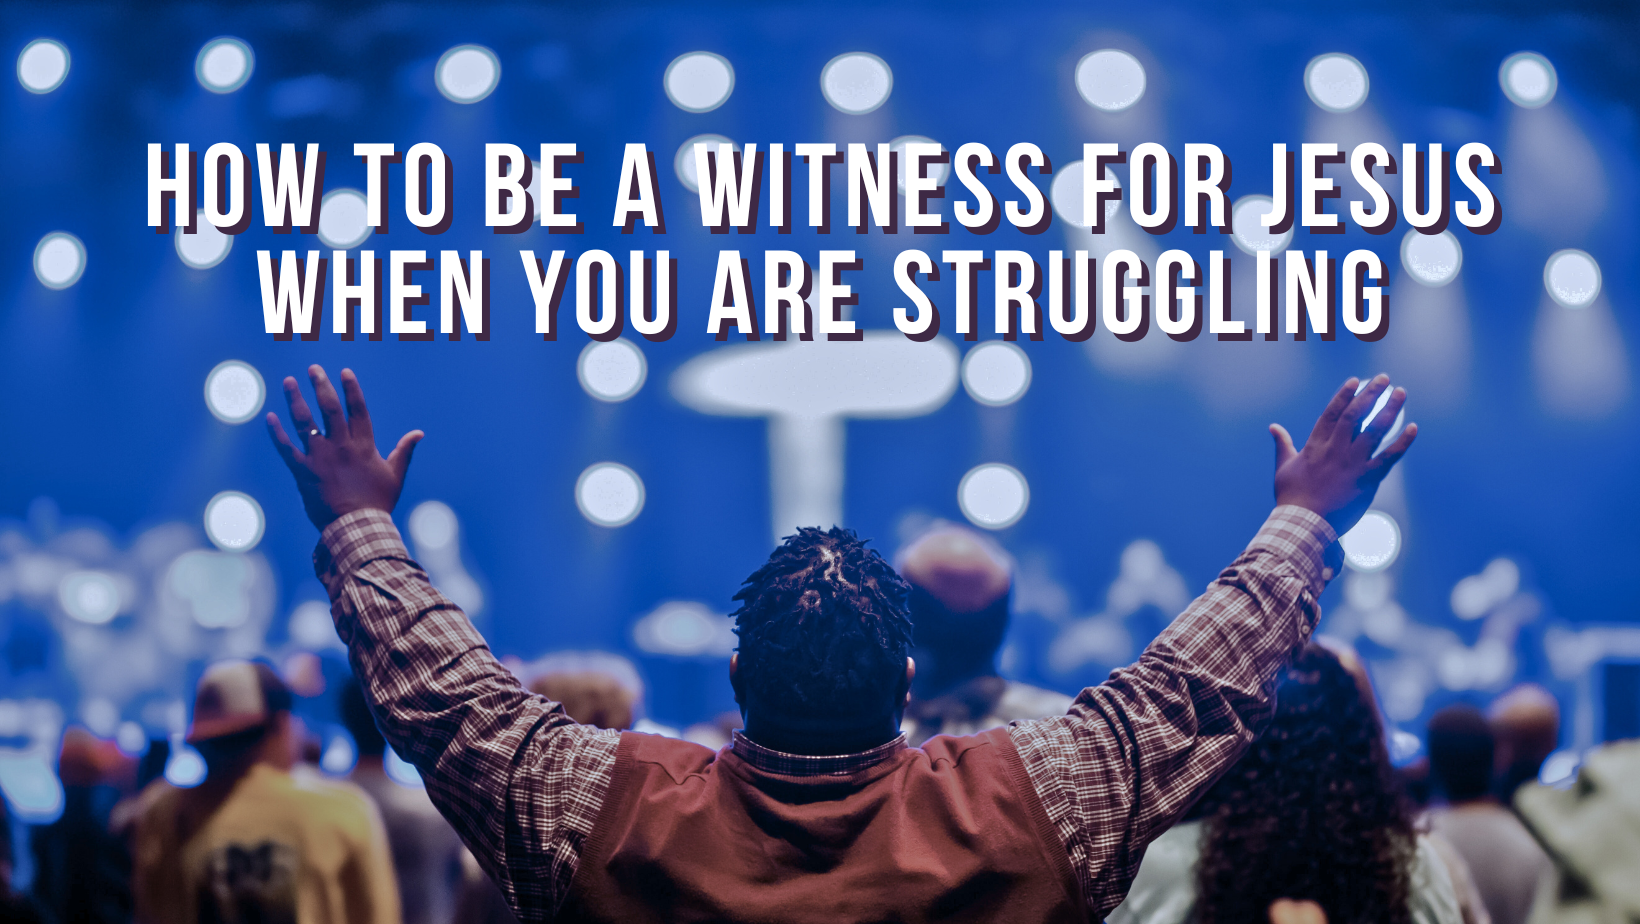 How to be a witness for Jesus when you are struggling